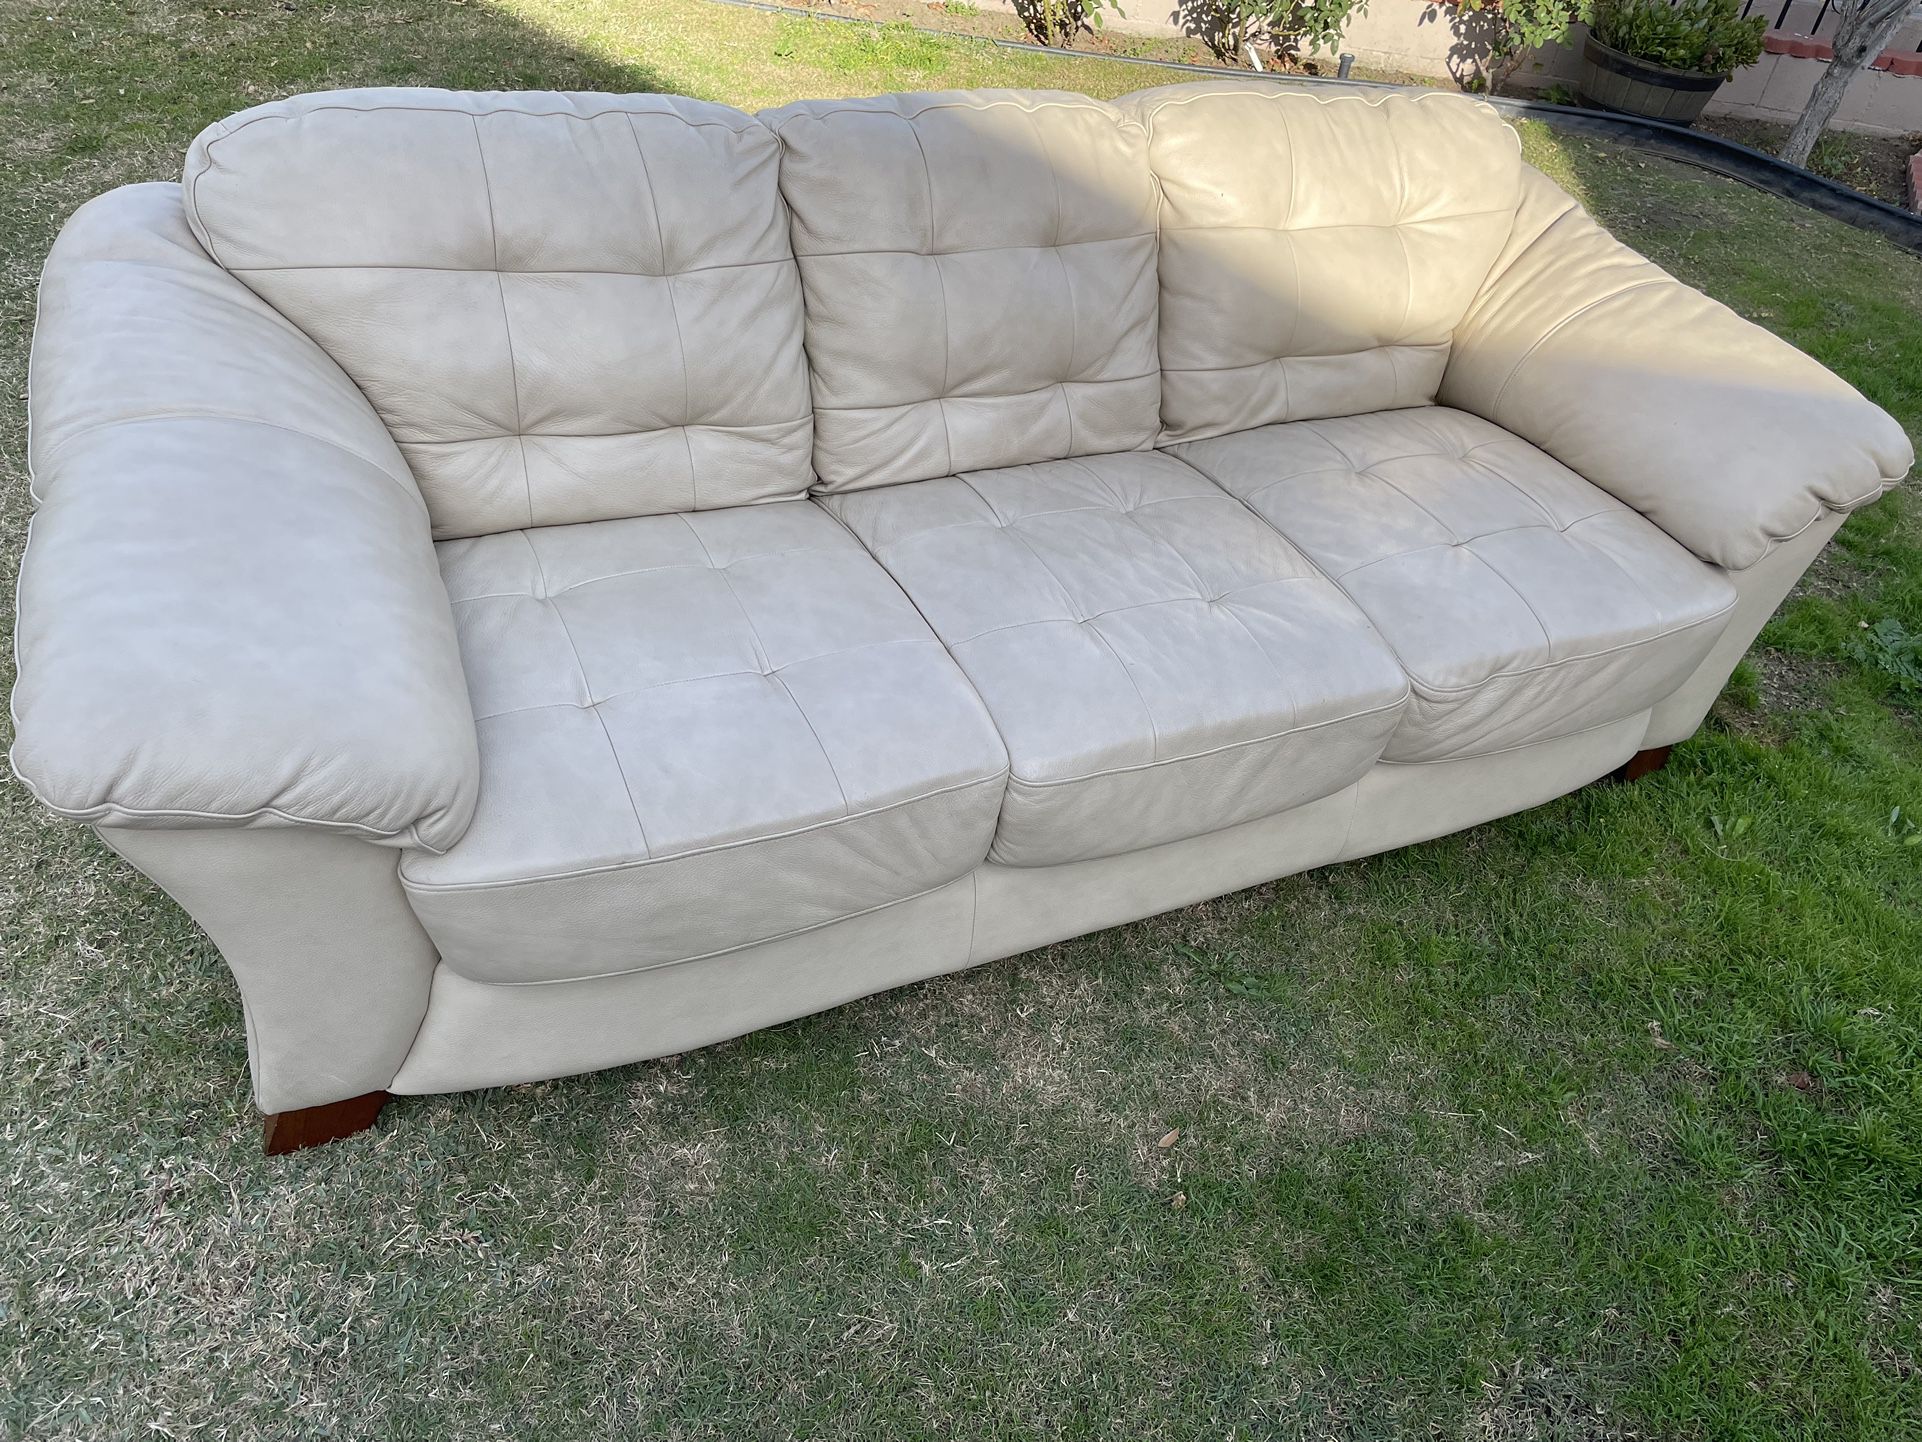 Used Couch - GENUINE LEATHER 